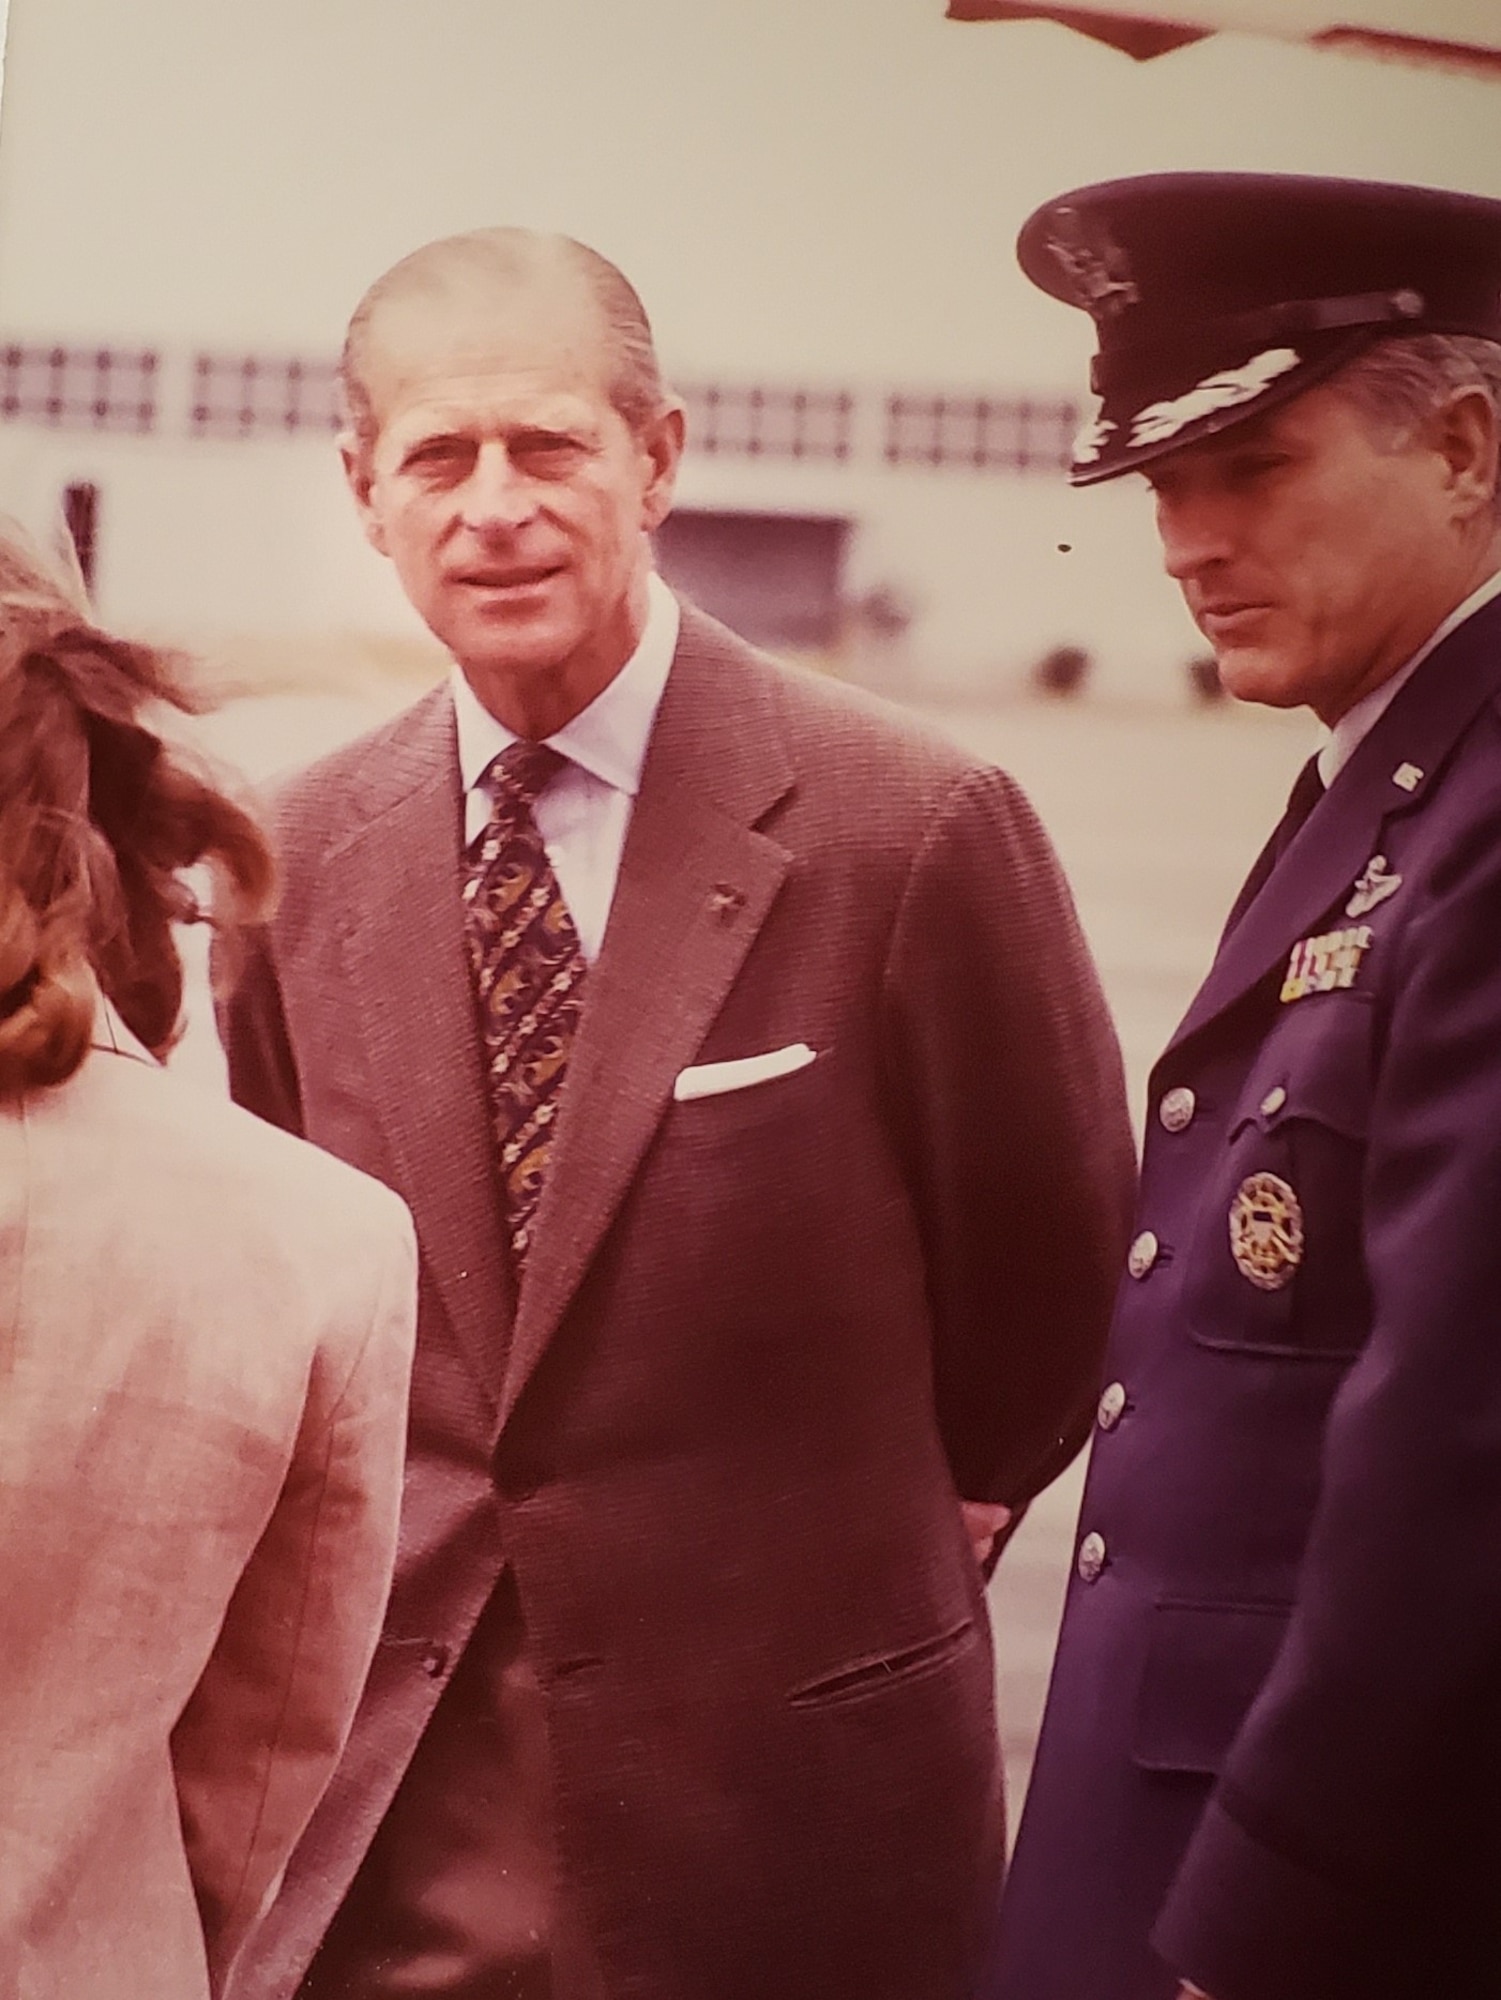 Prince Philip from Great Britain, left, stands beside Col. Donald Smith, 62nd Airlift Wing commander, after landing at McChord, Wash., May 22, 1980.